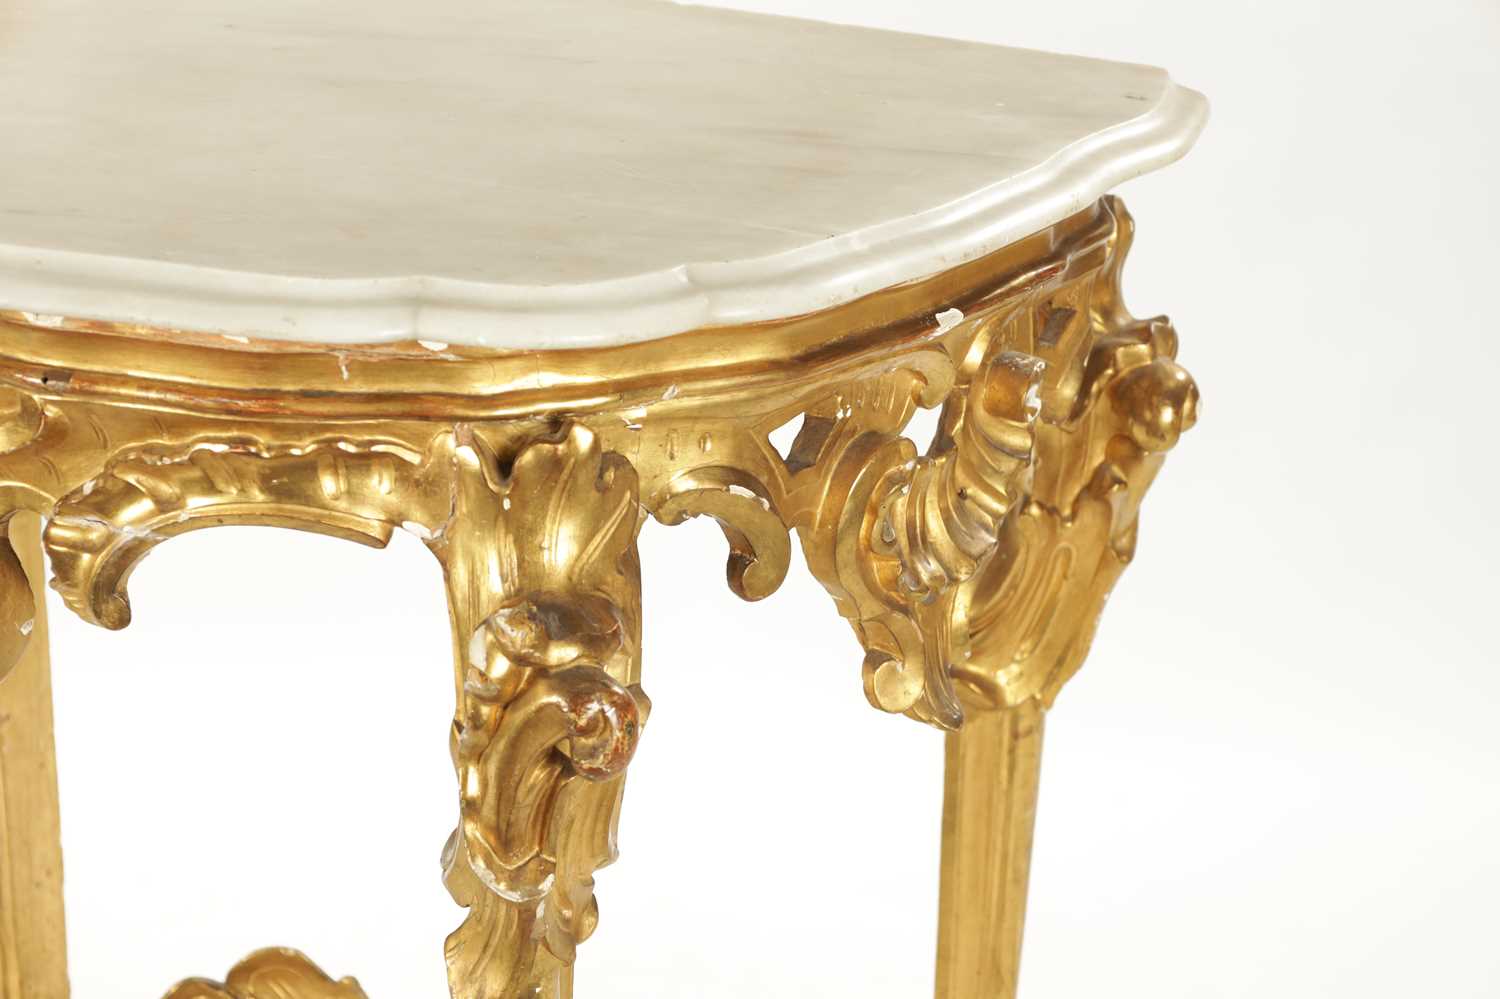 AN 18TH CENTURY CARVED GILTWOOD CONSOLE TABLE - Image 2 of 7